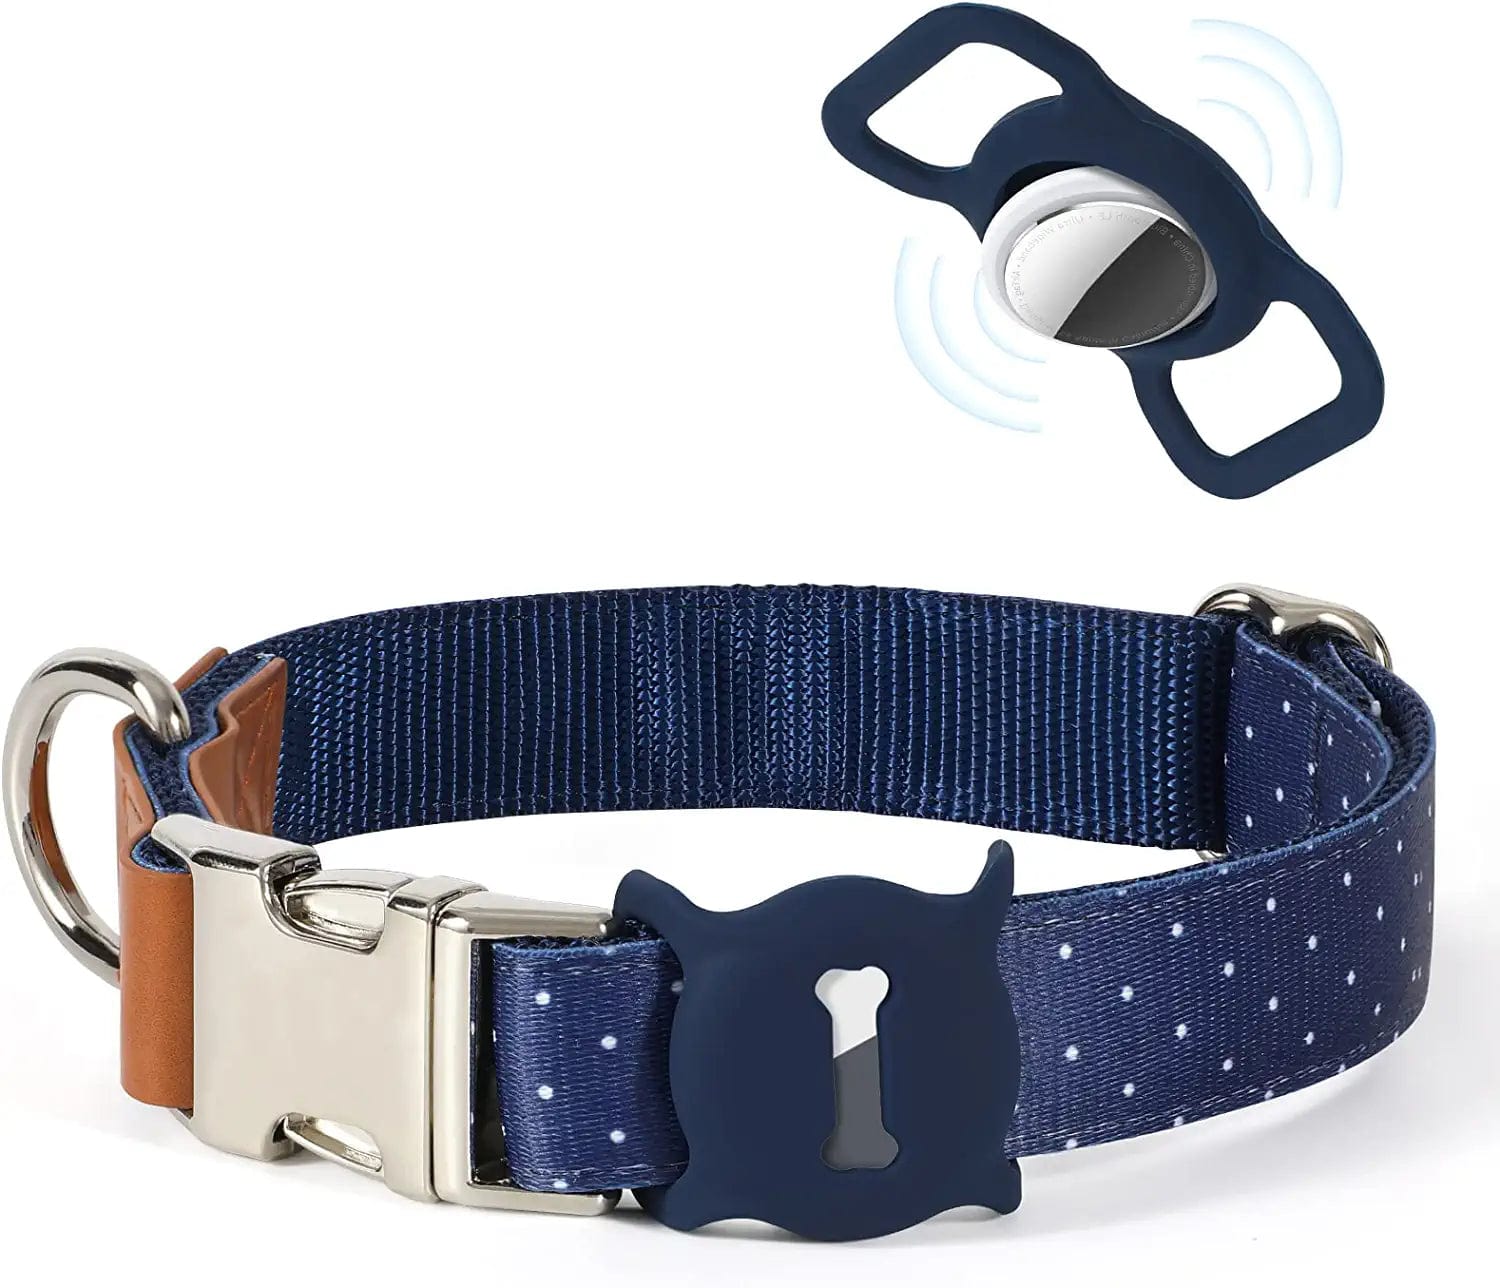 WHIPPY Airtag Dog Collar Adjustable Apple Air Tag Accessories Dog Collar Heavy Duty Metal Buckle Floral Dog Collar with Airtag Holder Case for Small Medium Large Dog Pet,M,Green Electronics > GPS Accessories > GPS Cases WHIPPY D-Navy Blue+AirTag Case L: 16"-25" 